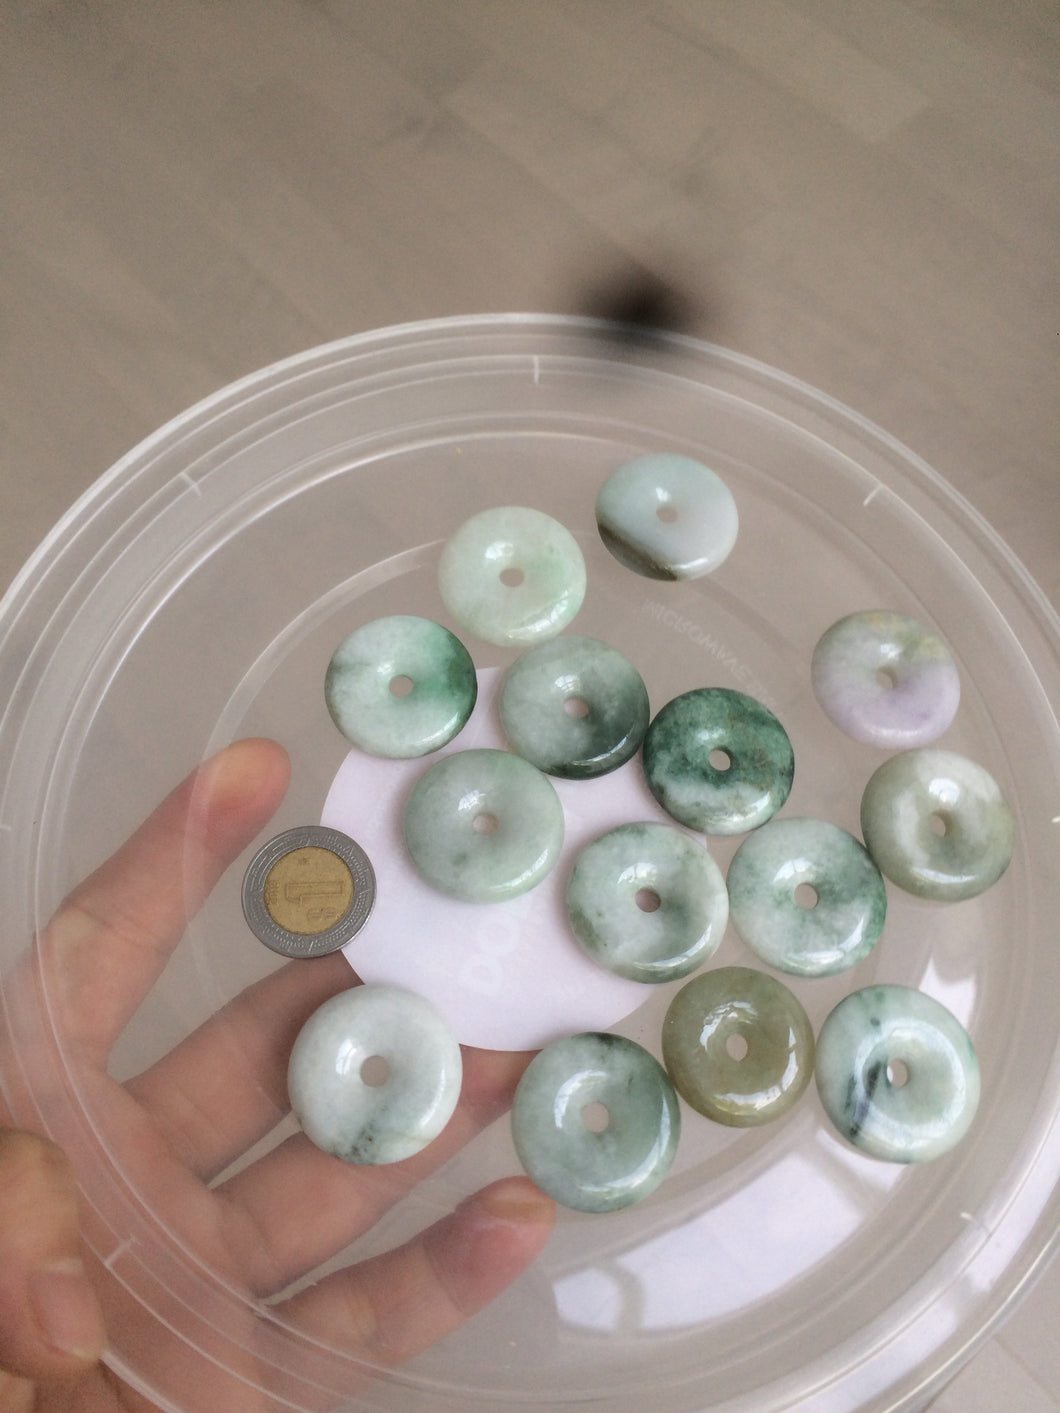 24-25mm Type A 100% Natural dark green/white Jadeite Jade Safety Guardian Button donut Pendant group AK40-2 (Add-on items)